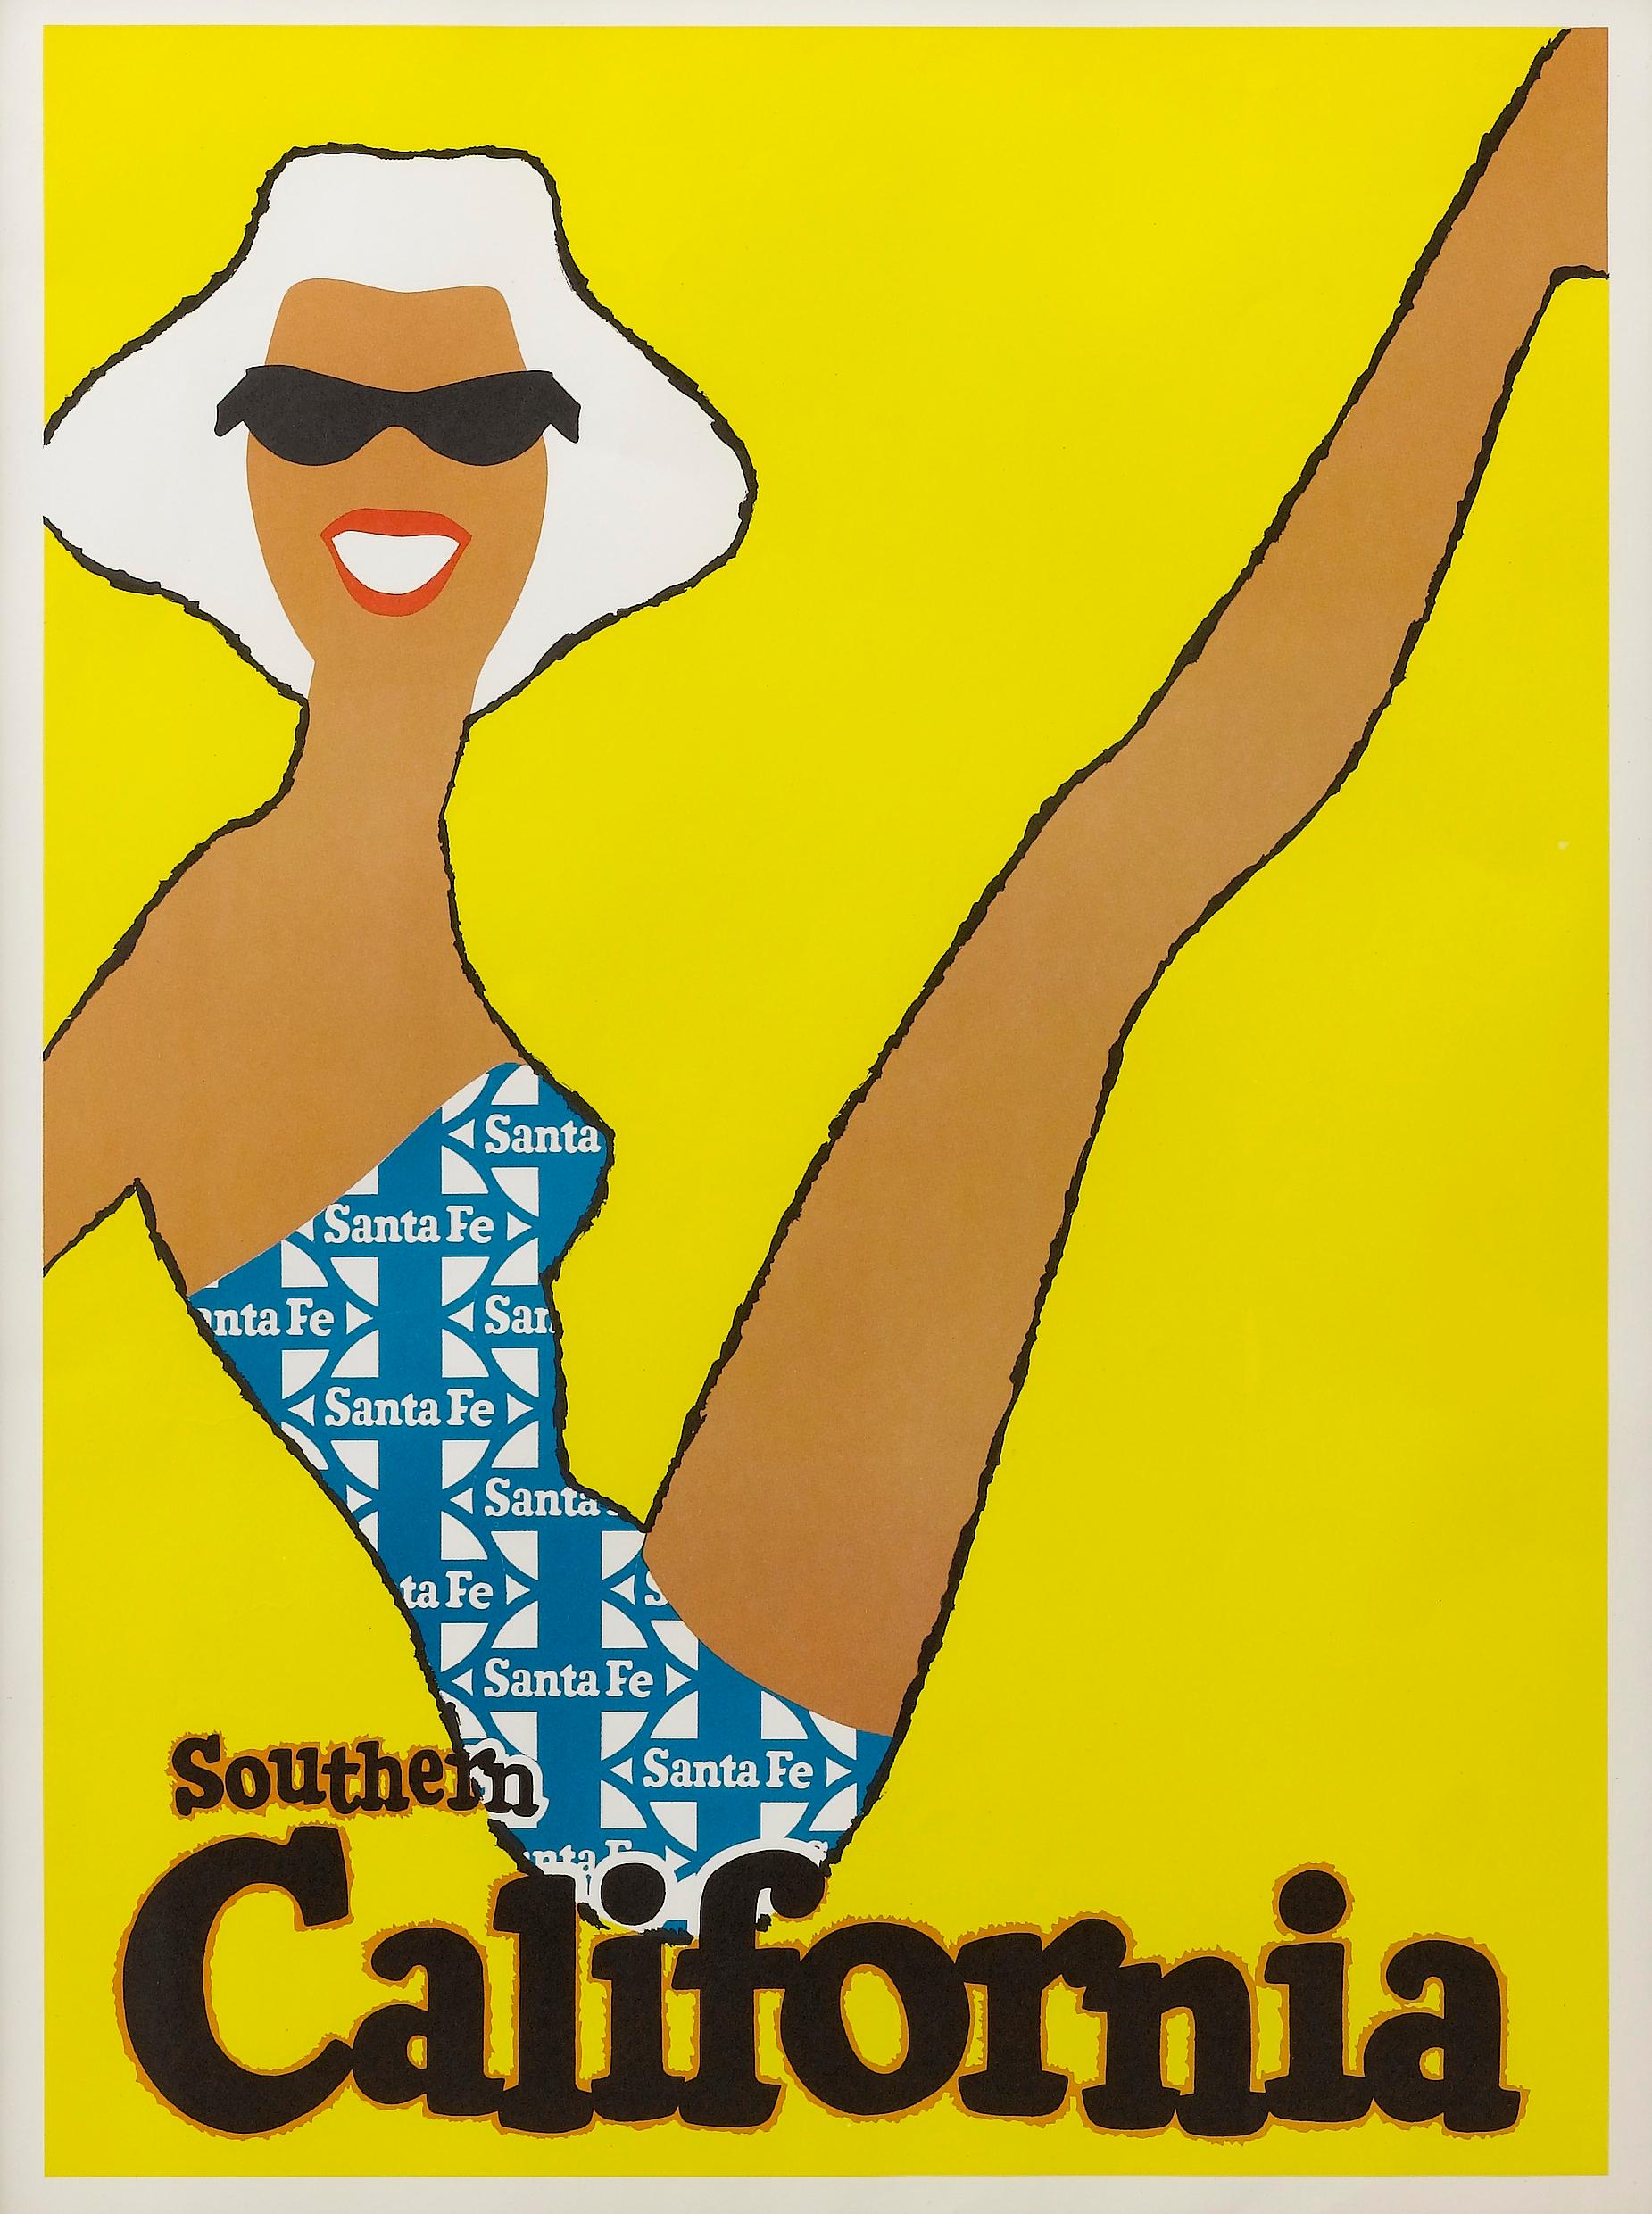 This is a vintage Southern California travel poster for the Santa Fe Southern Railway, printed in the 1950s. This midcentury poster is typical of advertising at the time; it is colorfully vibrant, with simplified but bold graphics. A smiling